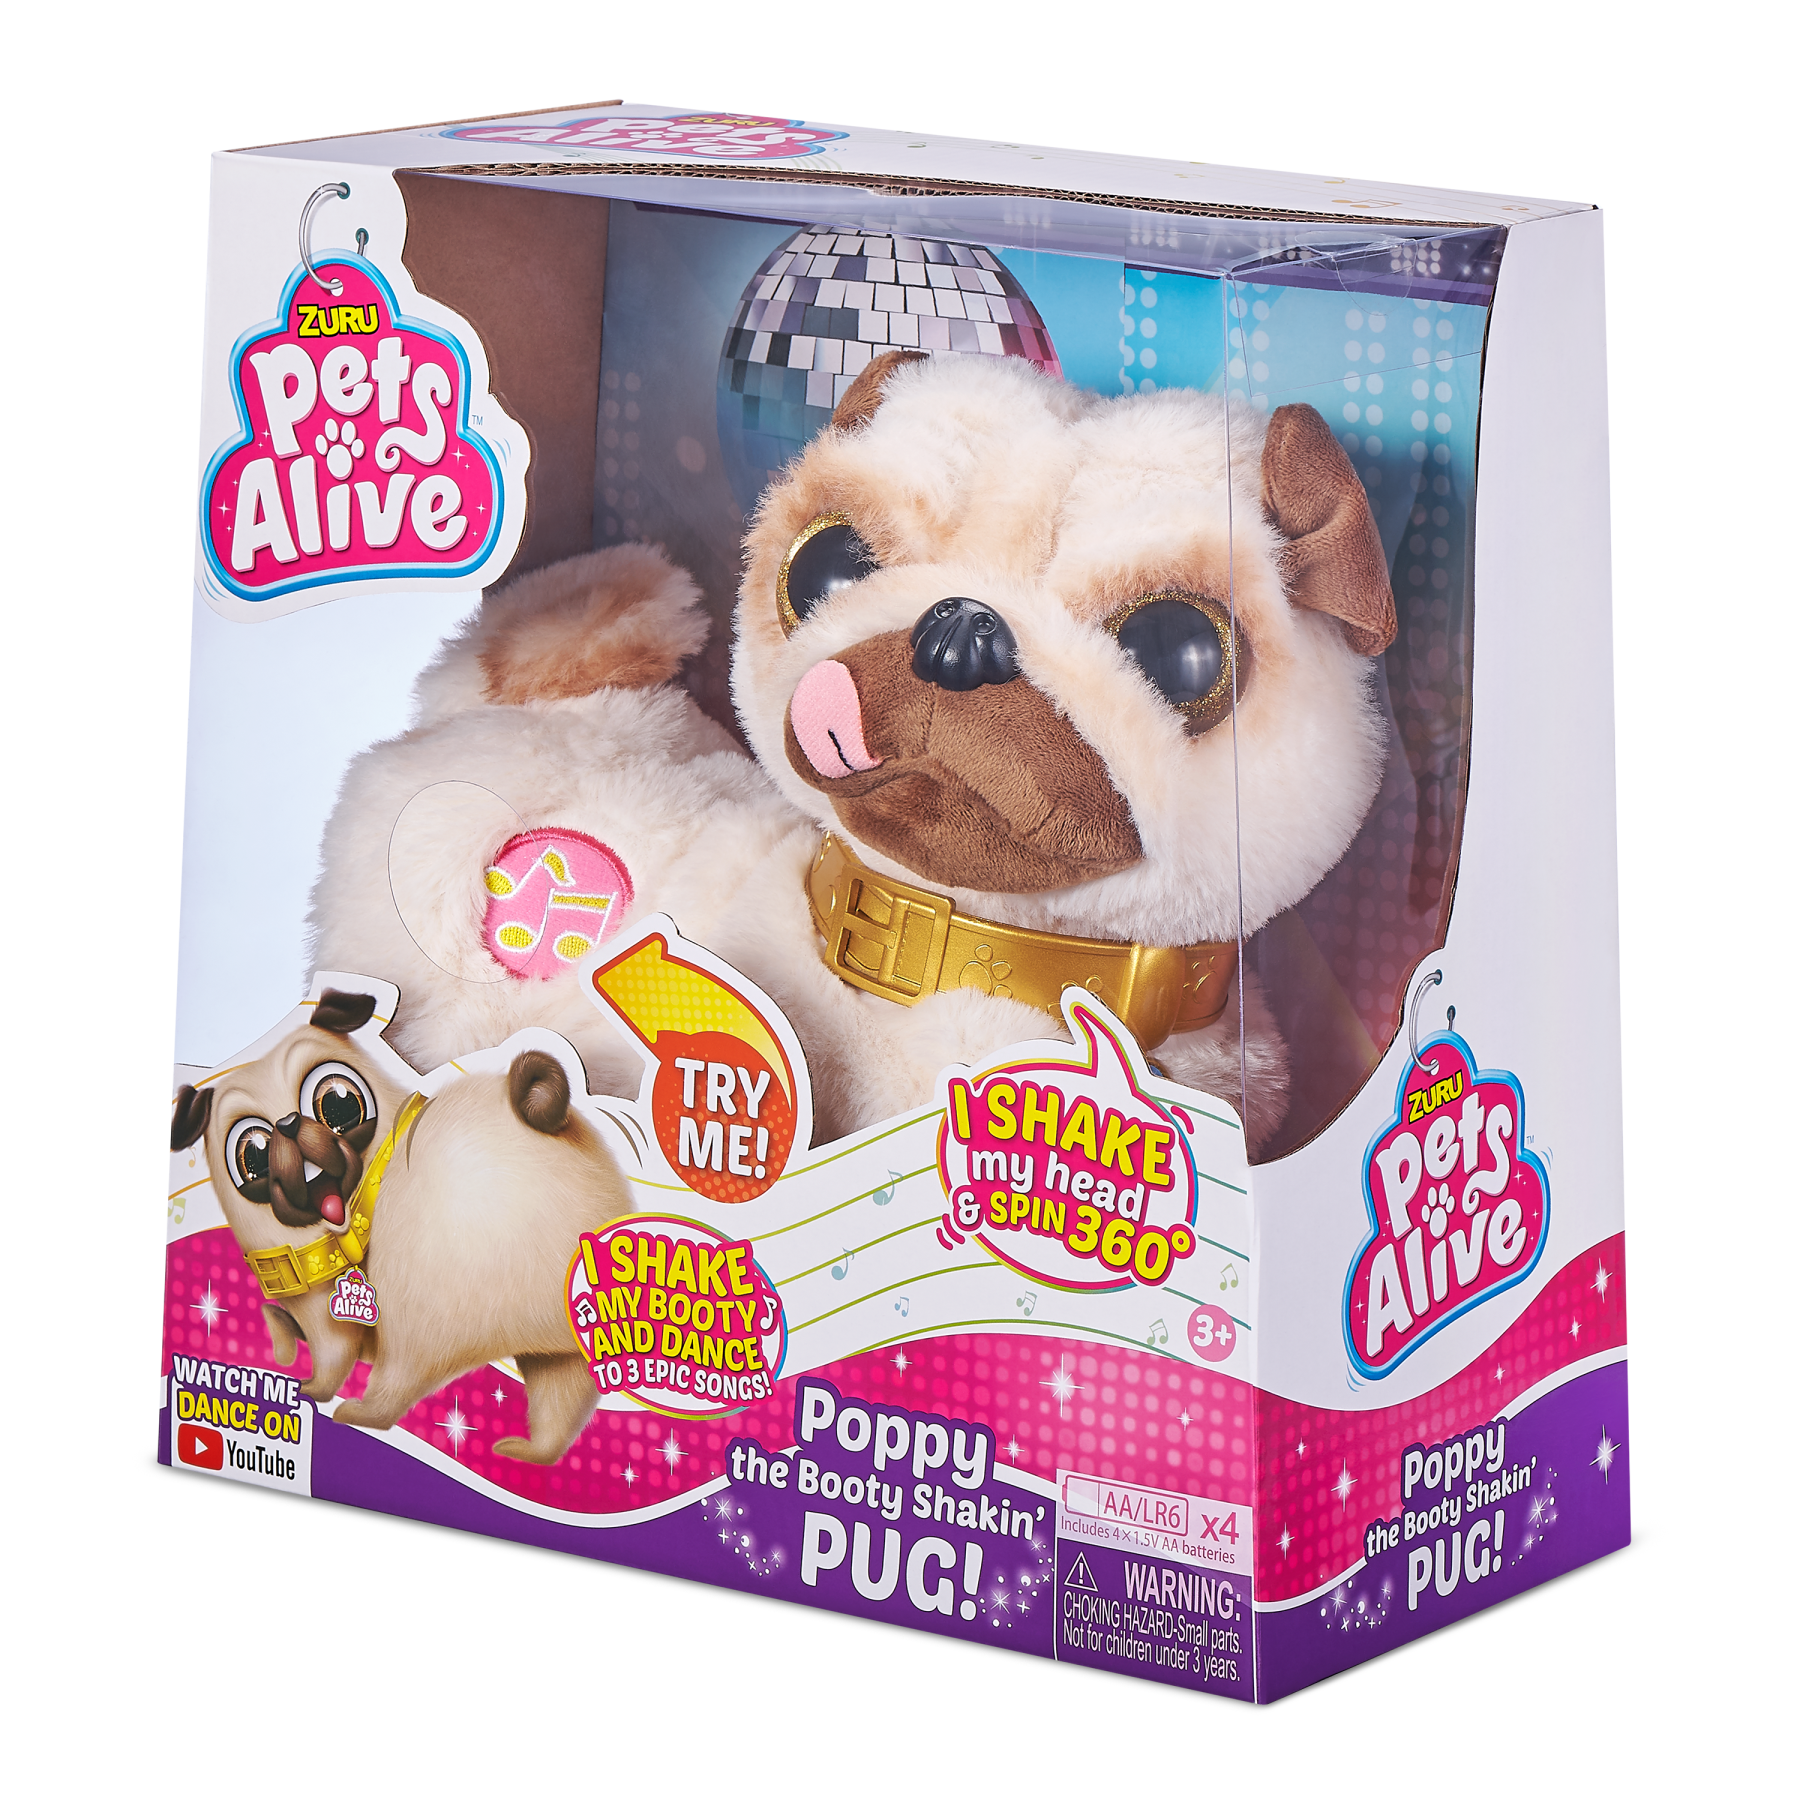 Pets alive s1 booty shaking plush - 